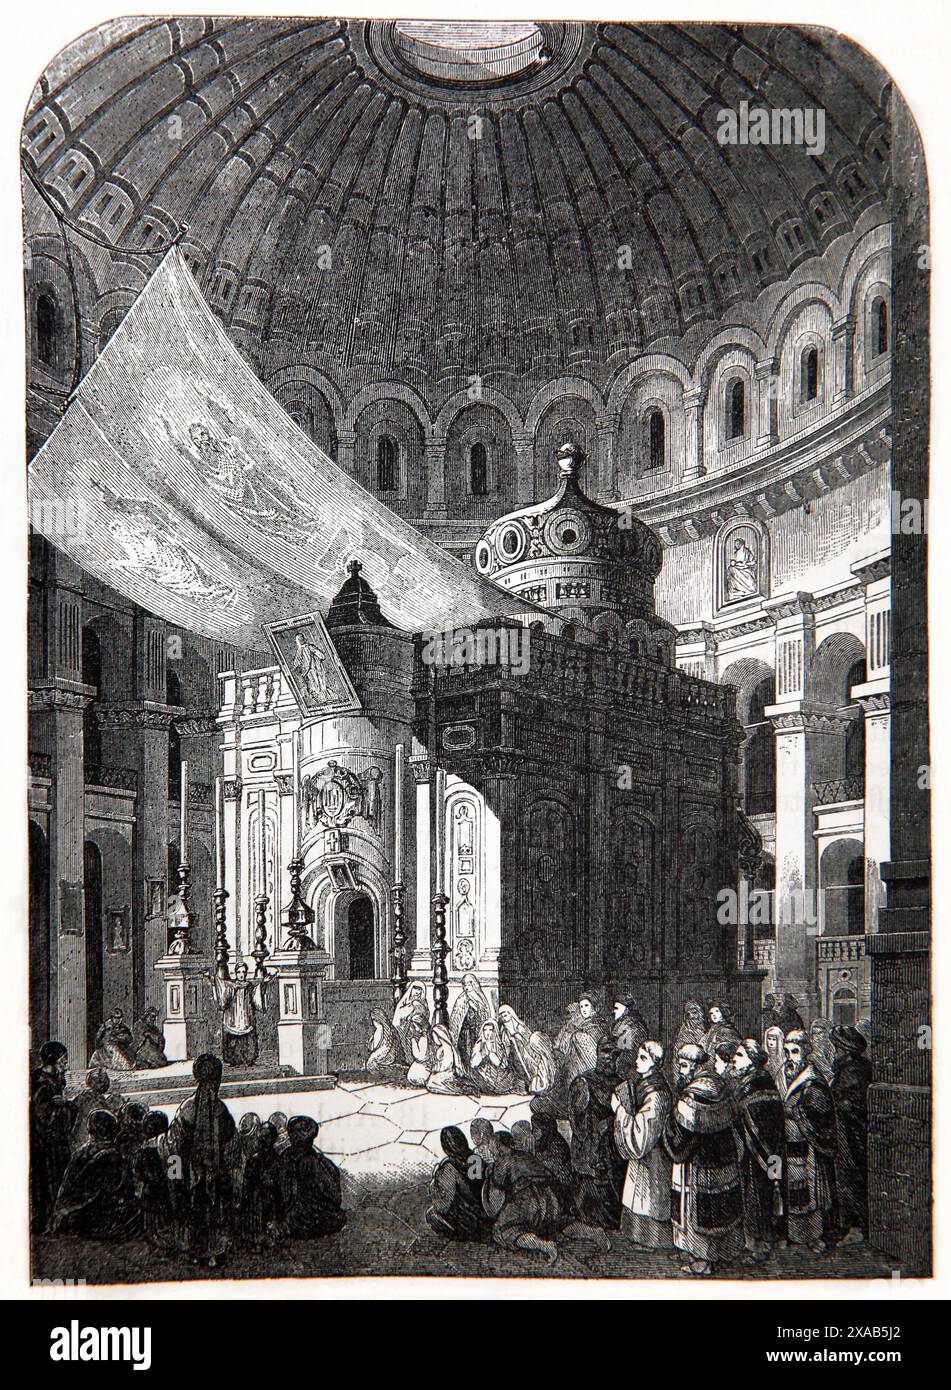 Wood Engraving of the Interior of the Church of the Holy Sepulchre Showing the Edicule that has the Remains of the Rock-Cut Tomb where Jesus Christ wa Stock Photo